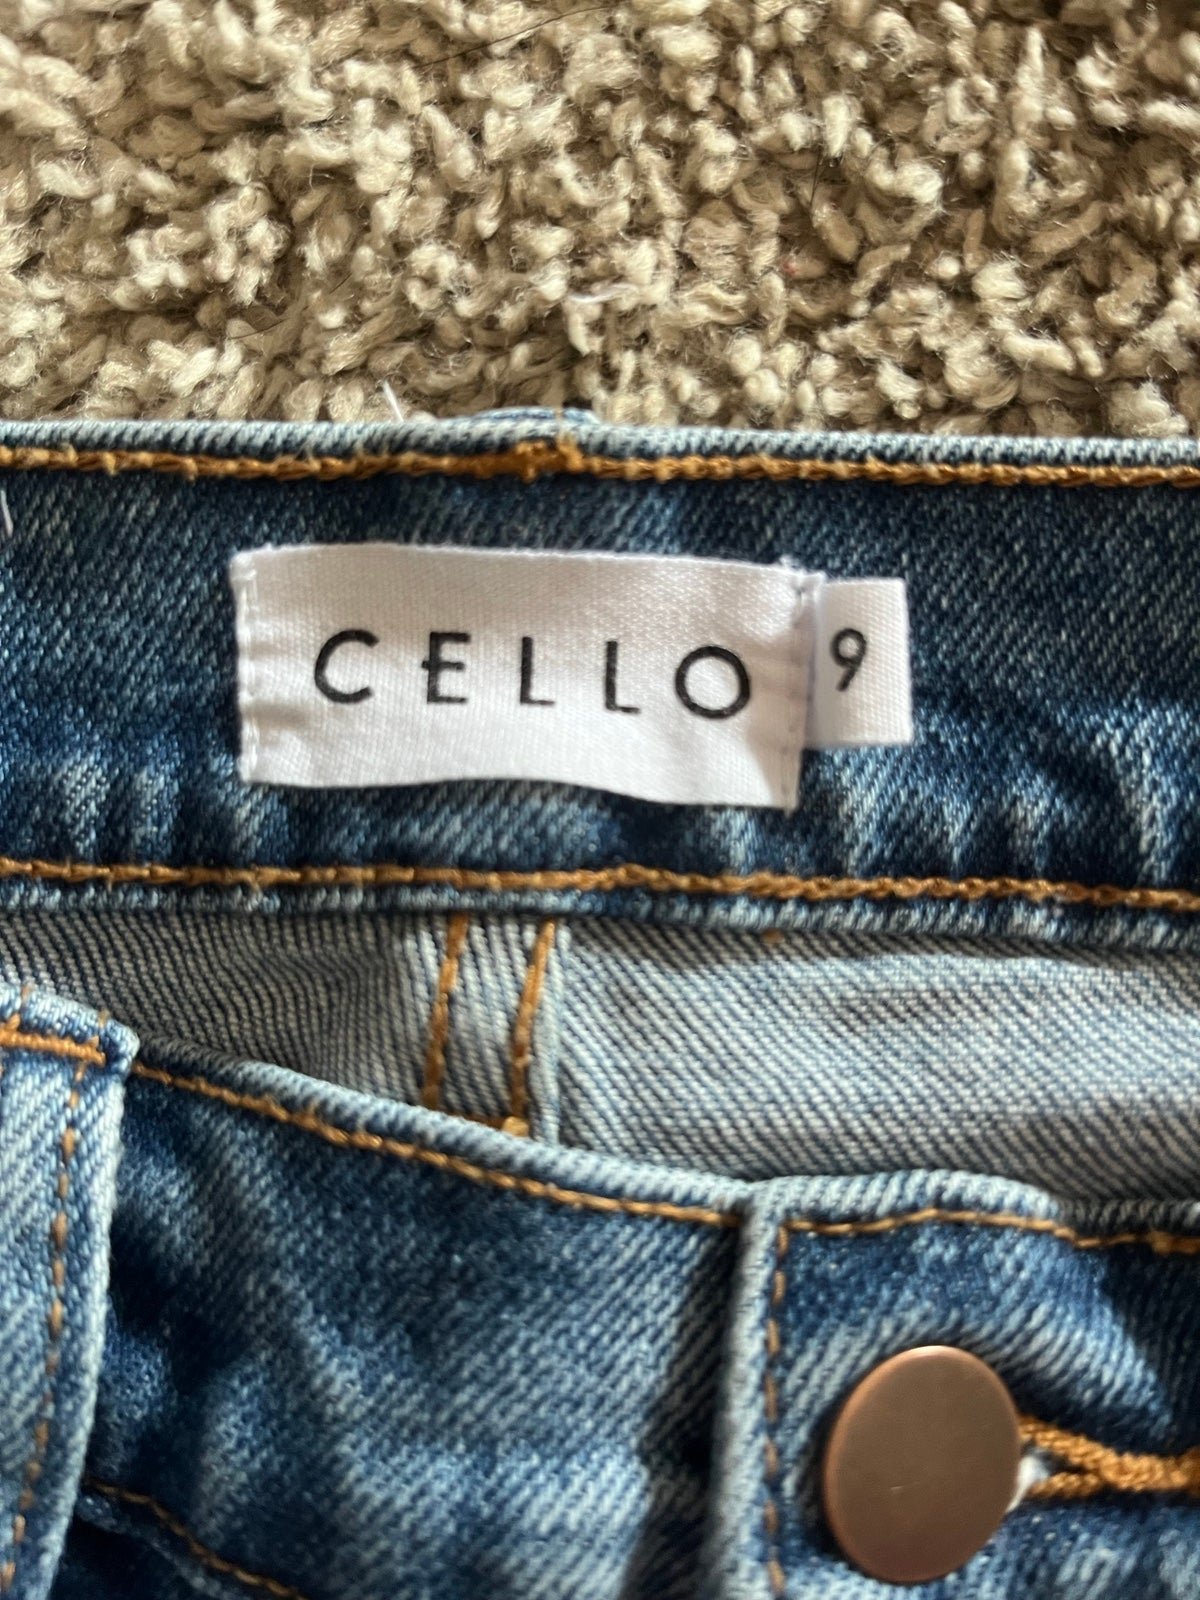 Affordable Cello Jeans ICjb1NzDz Outlet Store